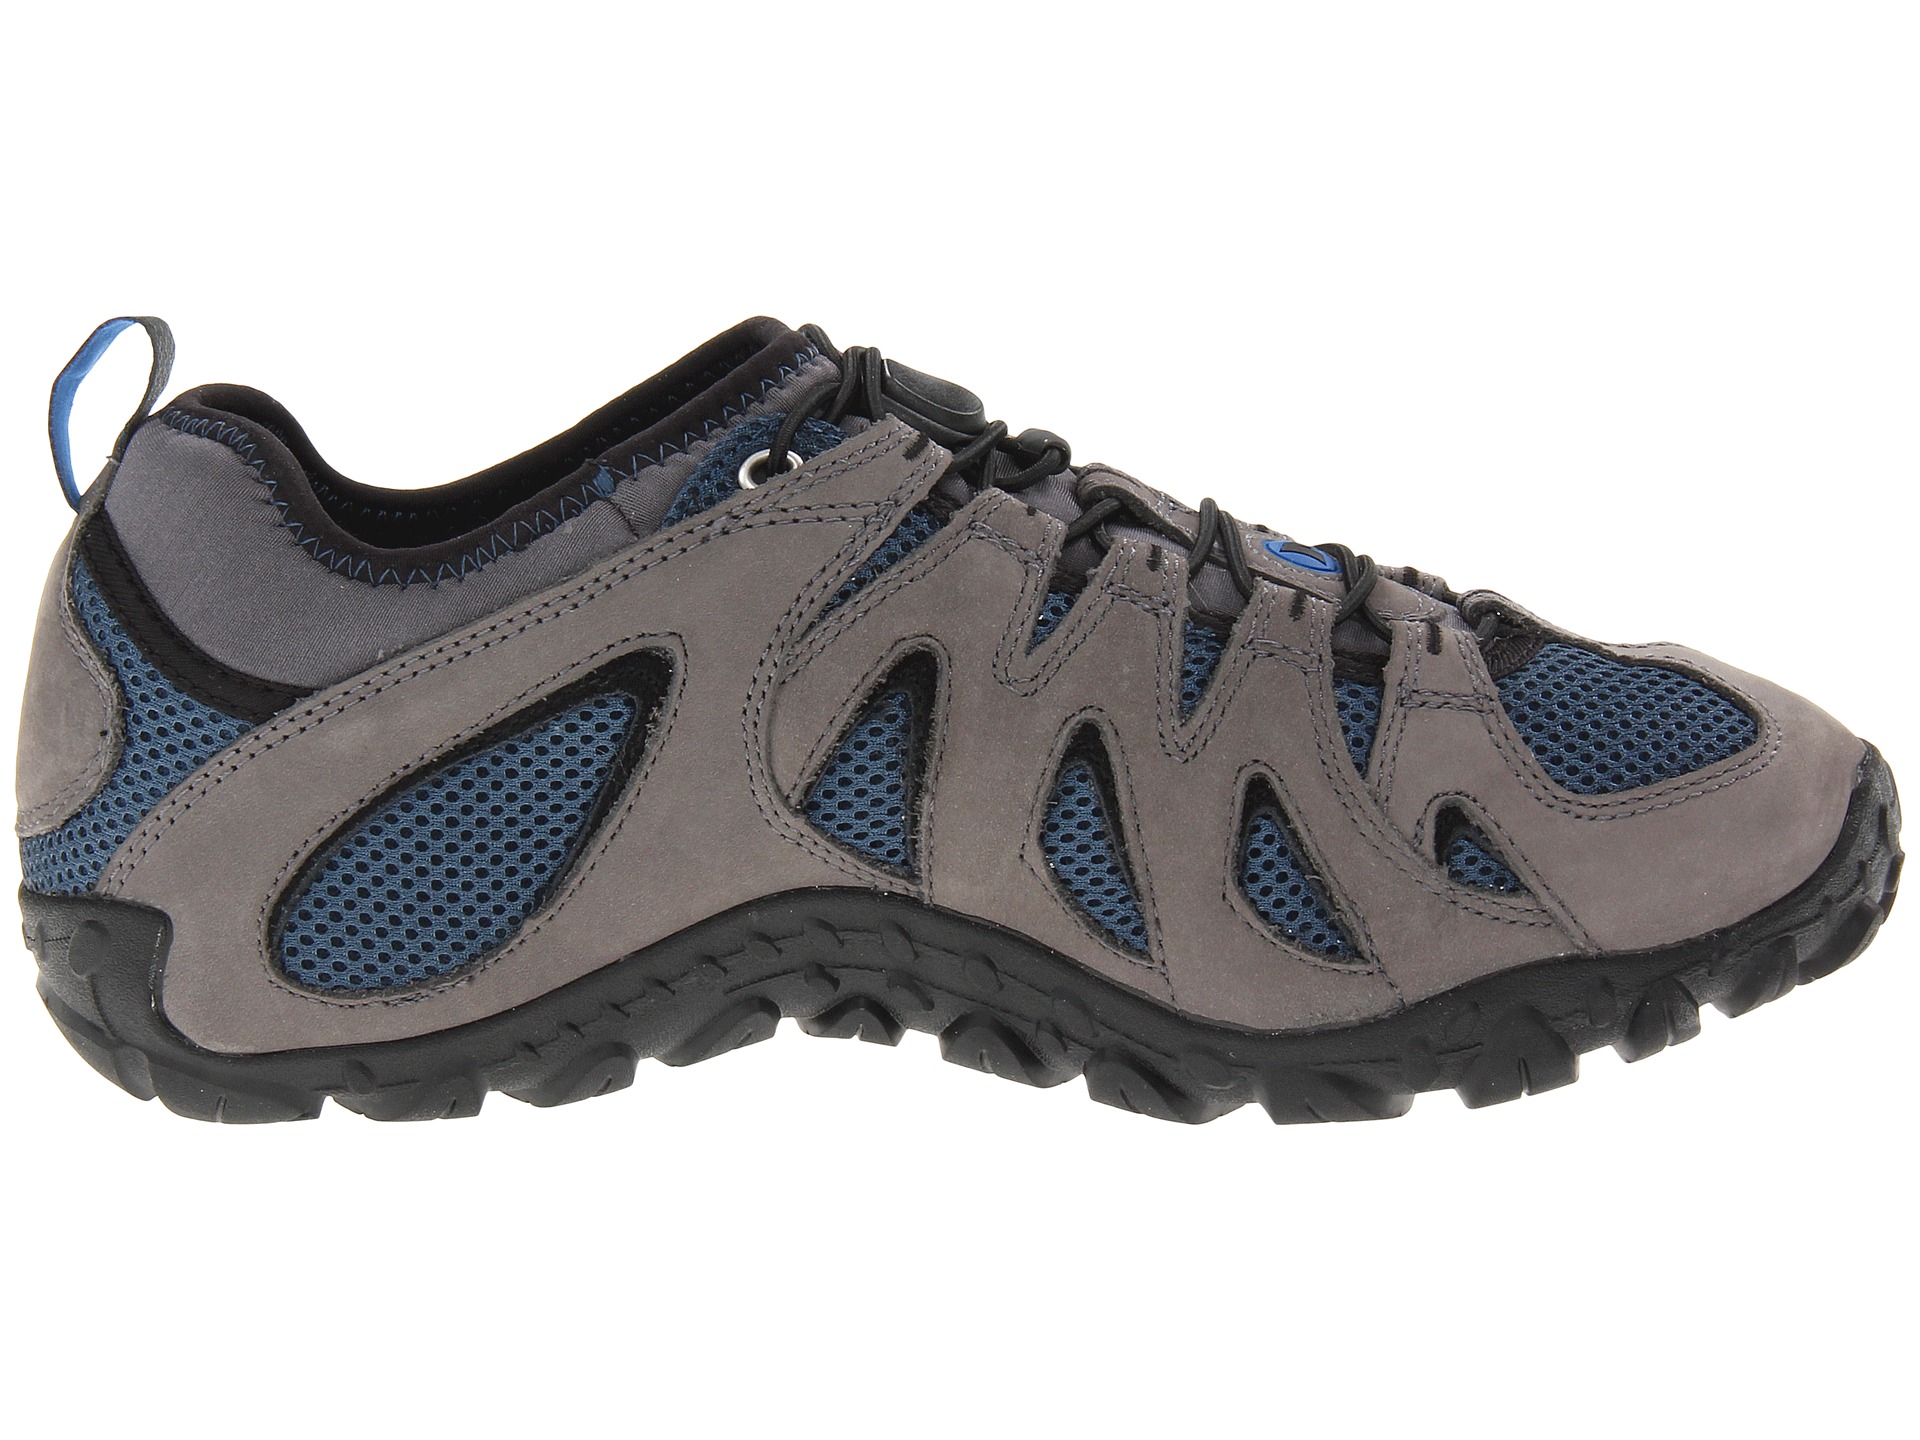 Merrell Chameleon 4 Stretch Castle Rock | Shipped Free at Zappos